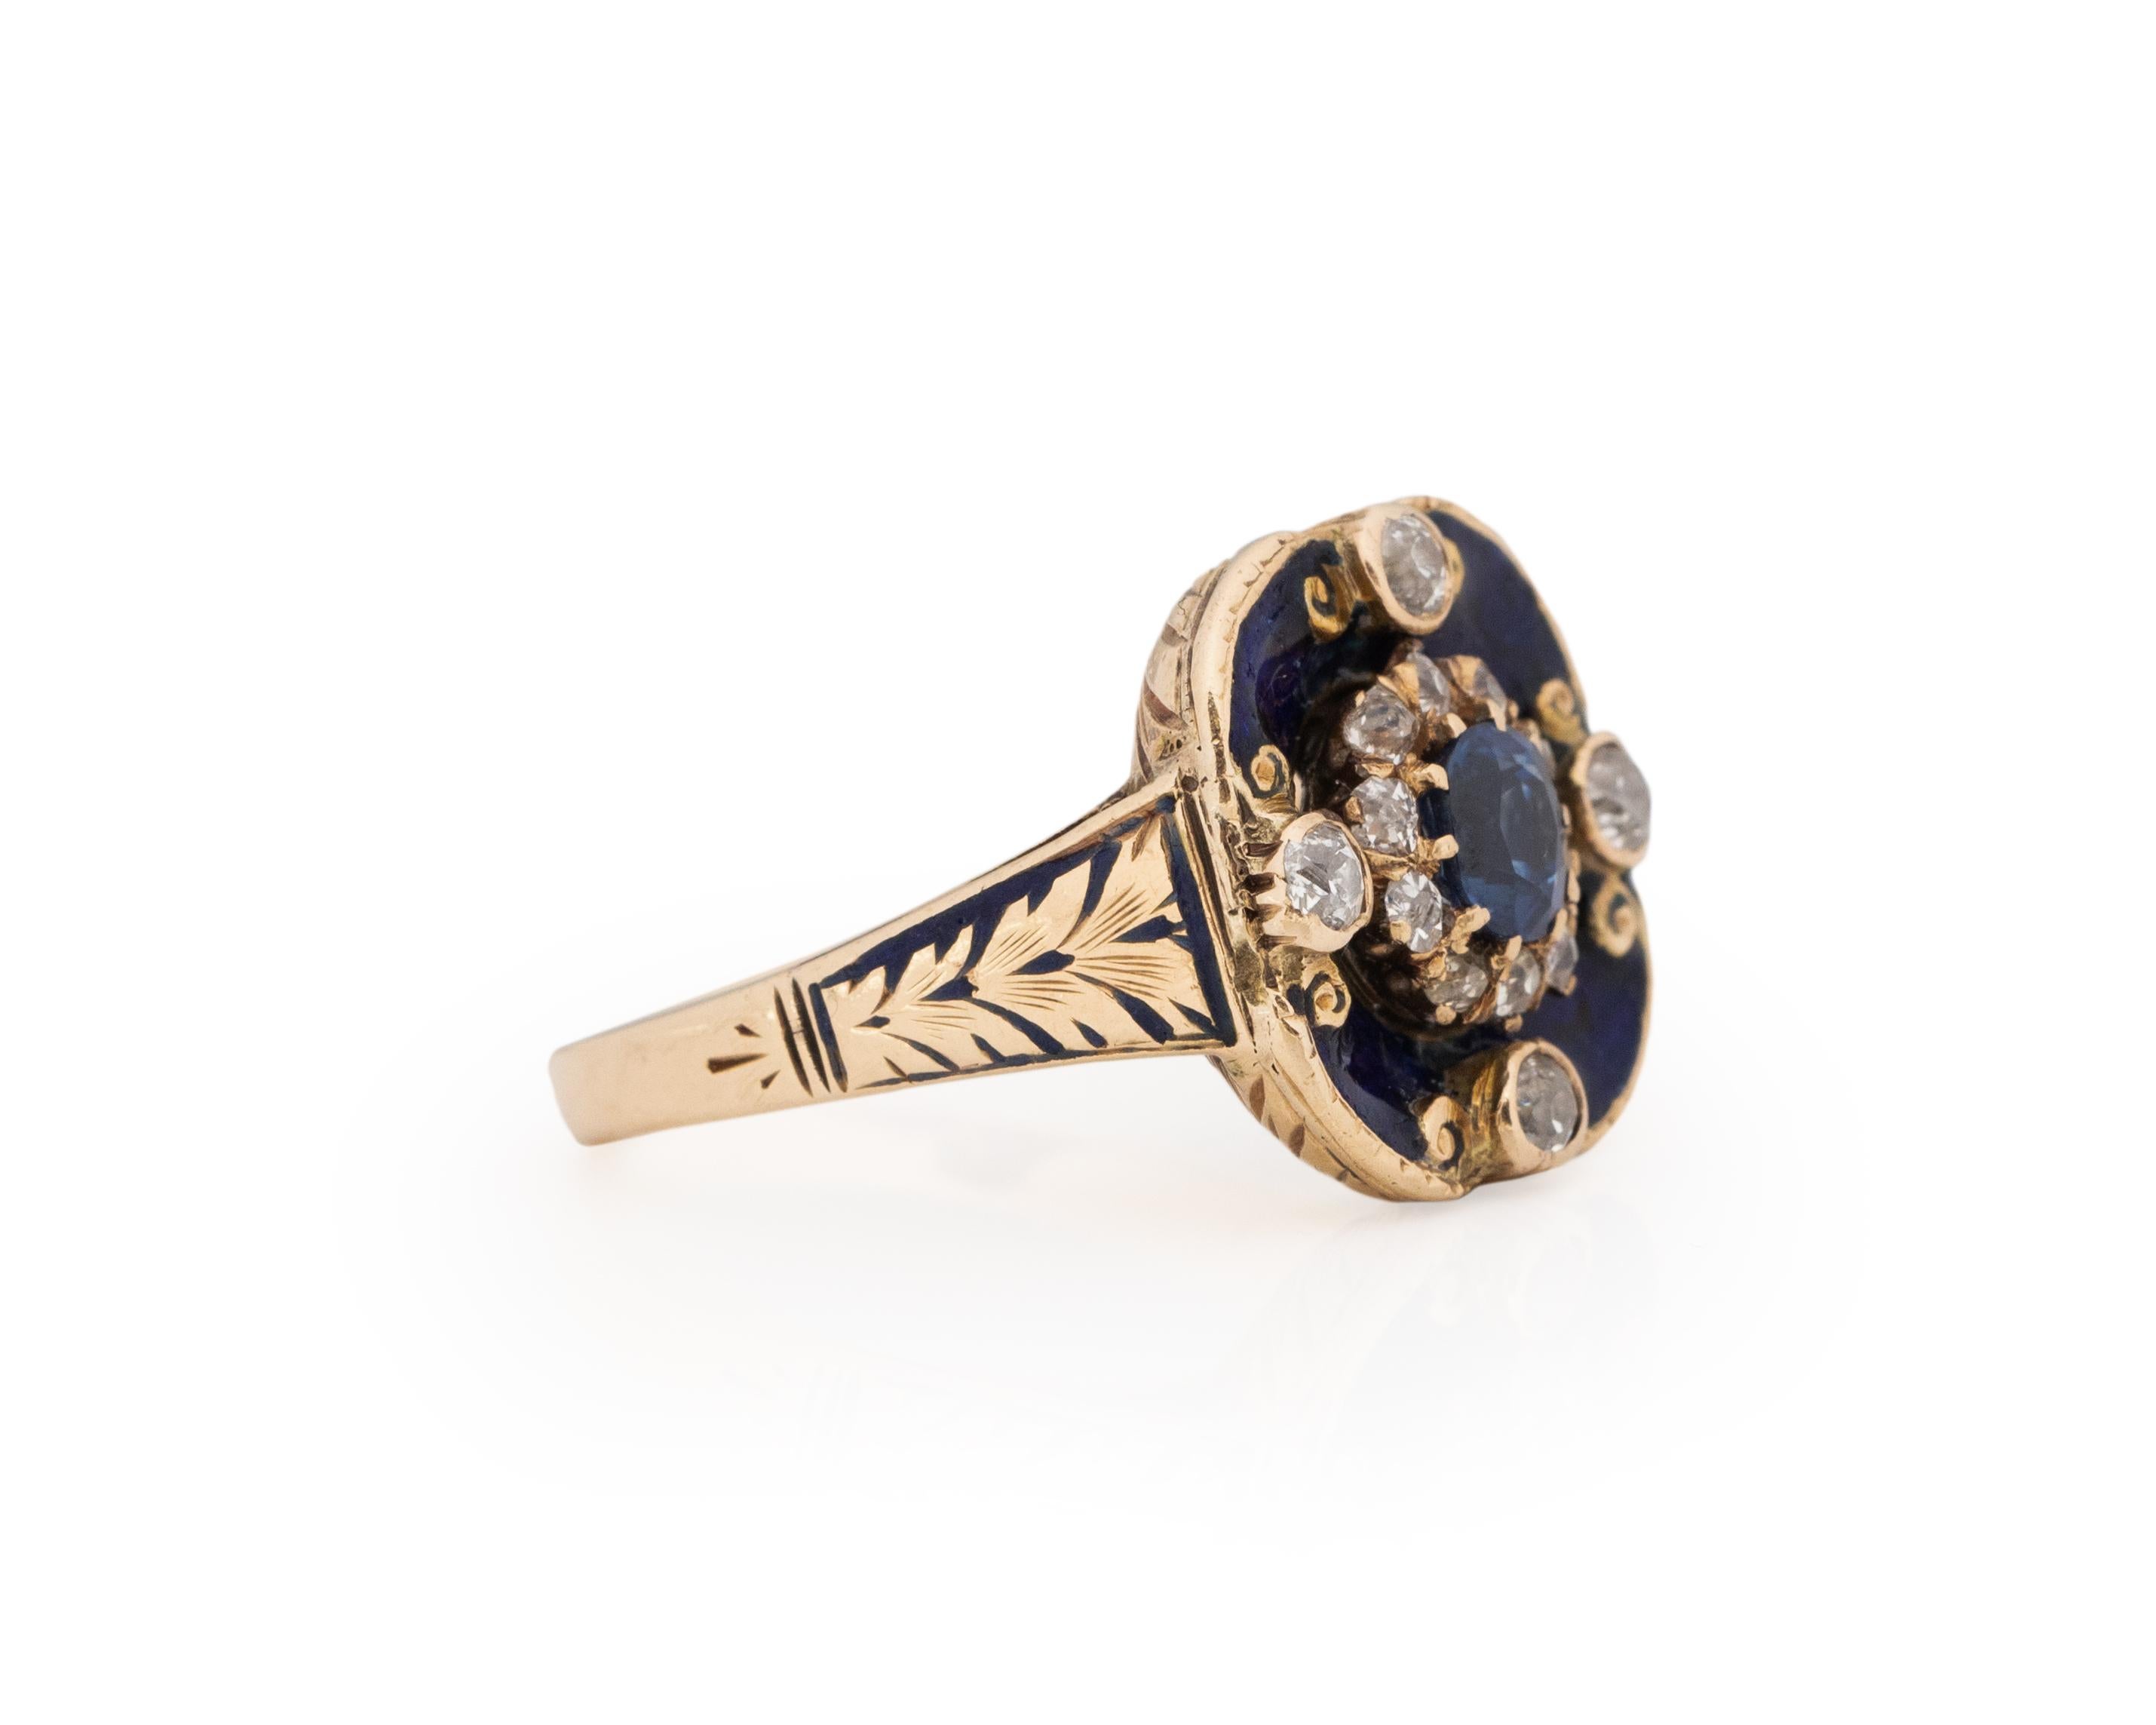 Ring Size: 6.5
Metal Type: 14K Yellow Gold [Hallmarked, and Tested]
Weight: 6.75 grams

Center Sapphire Details:
Type: UNHEATED, Natural.
GIA REPORT #: 2225395078
Weight: .50ct
Cut: Old Mine Brilliant
Color: Blue
Measurements: 4.74mm x 4.11 x